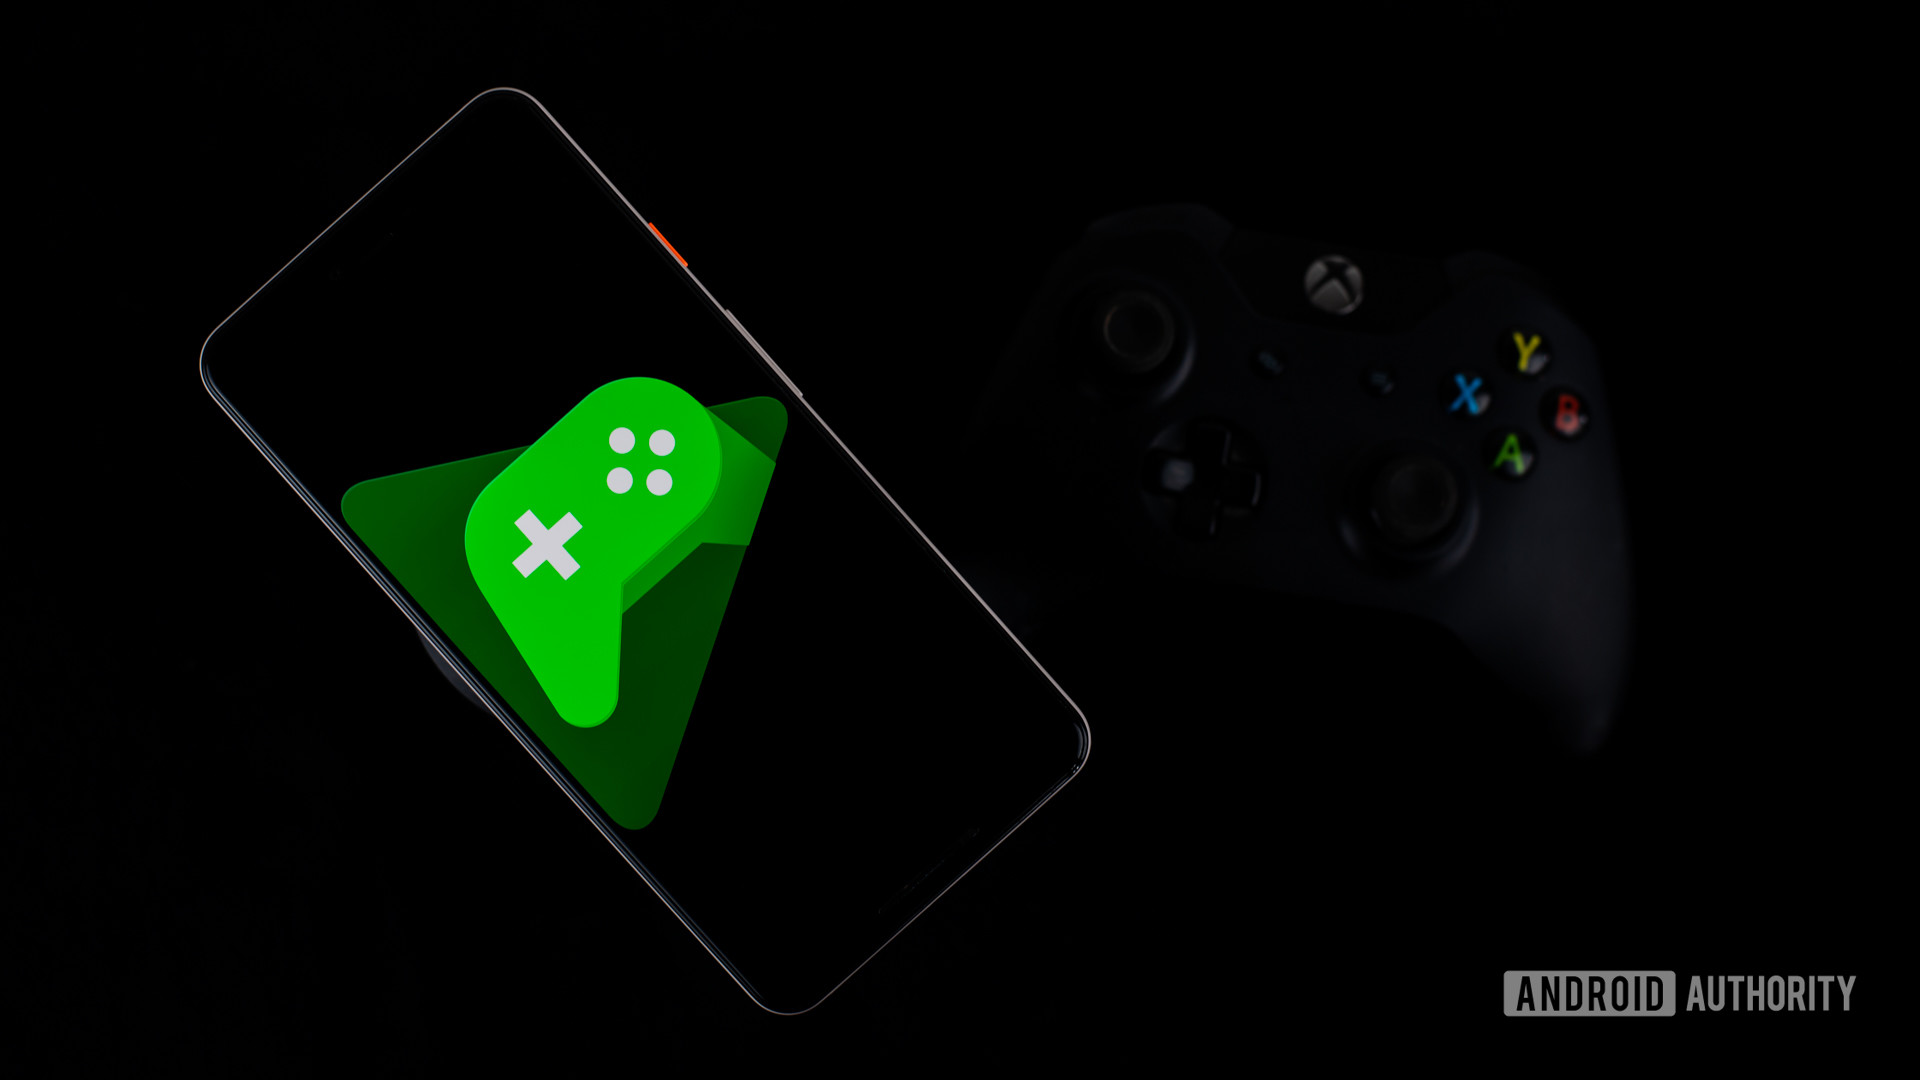 Google Play Games on smartphone next to controller